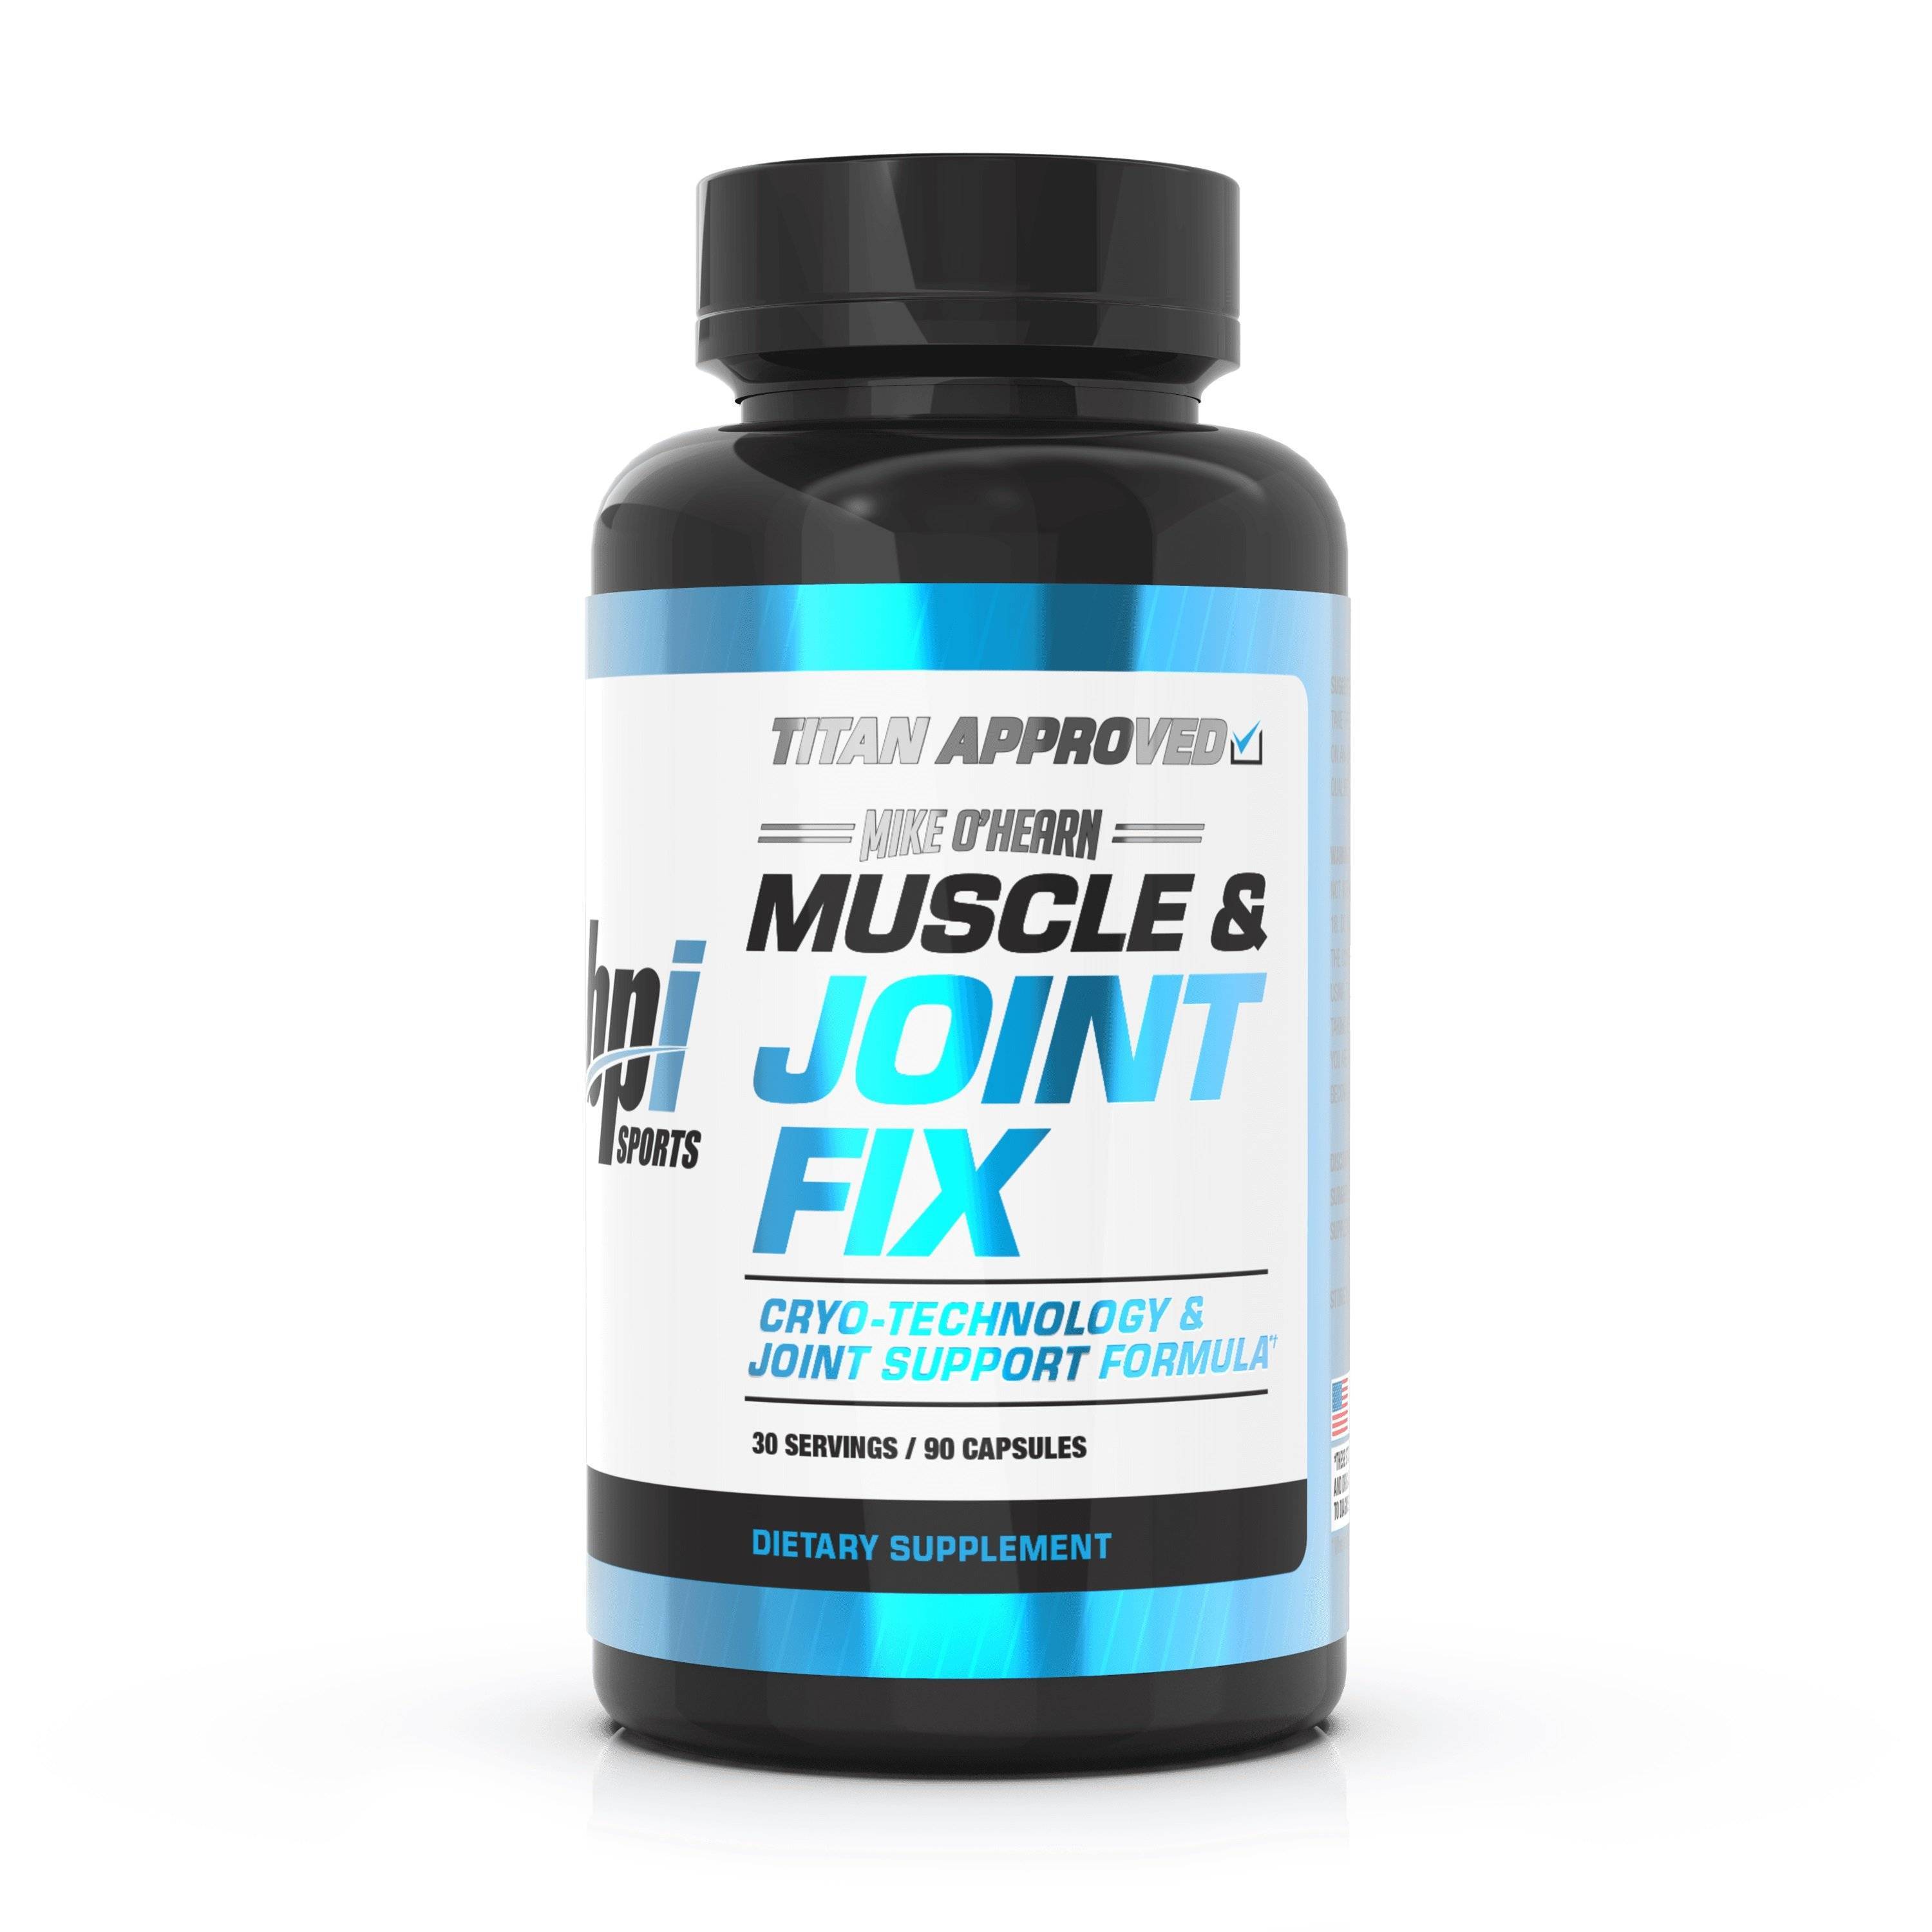 Capsule bottle of Muscle & joint fix